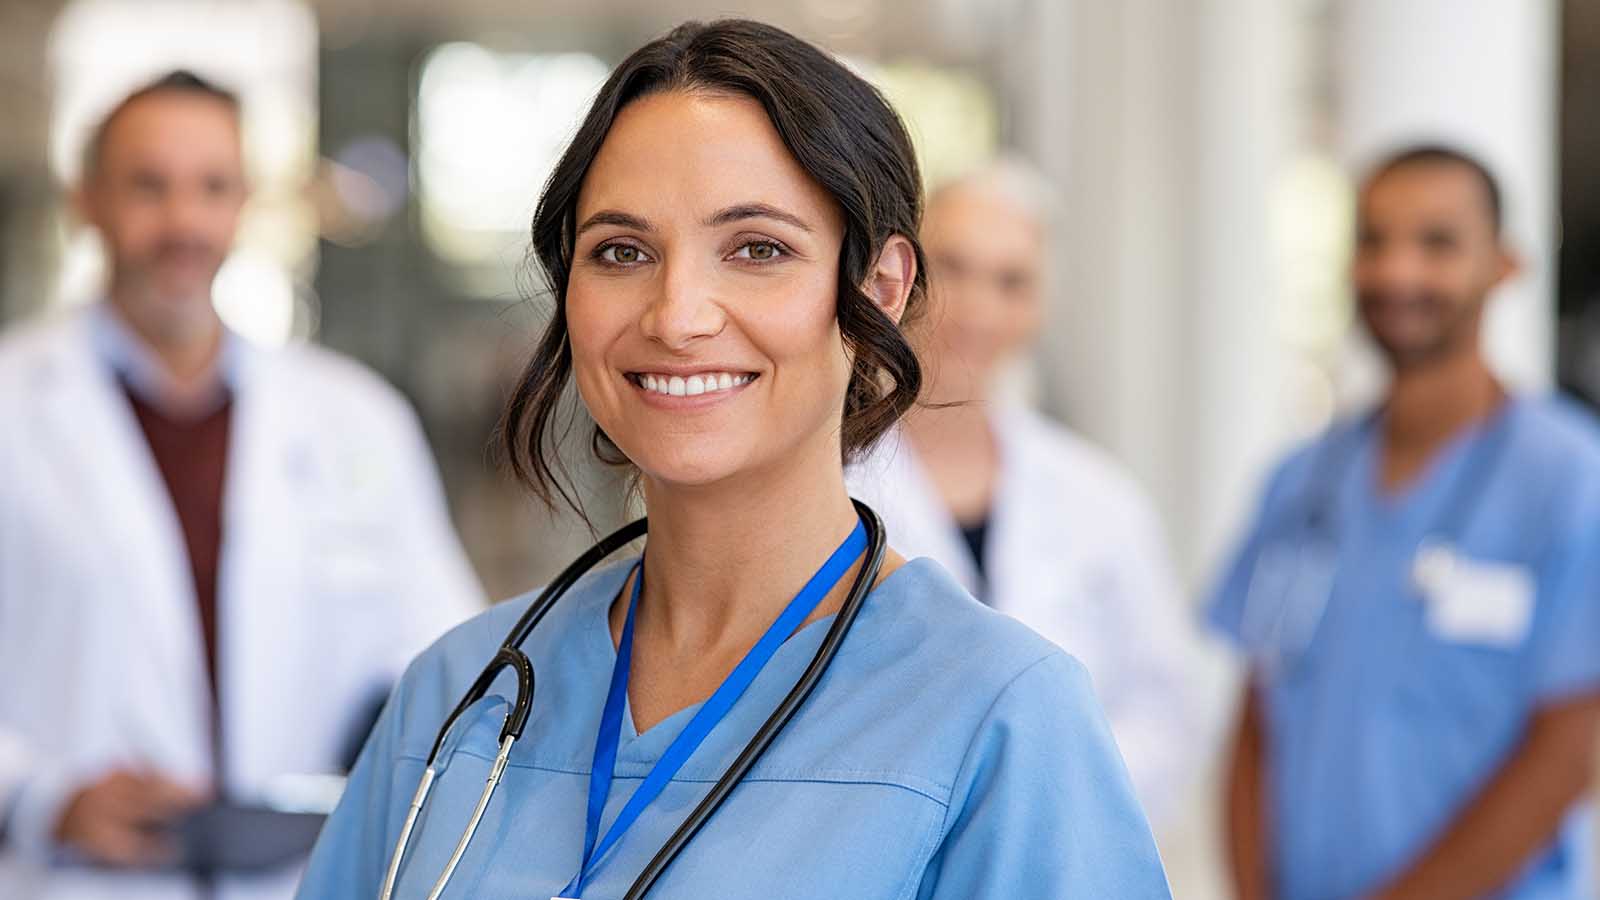 Portrait of smiling young nurse in uniform smiling with healthcare team in background.